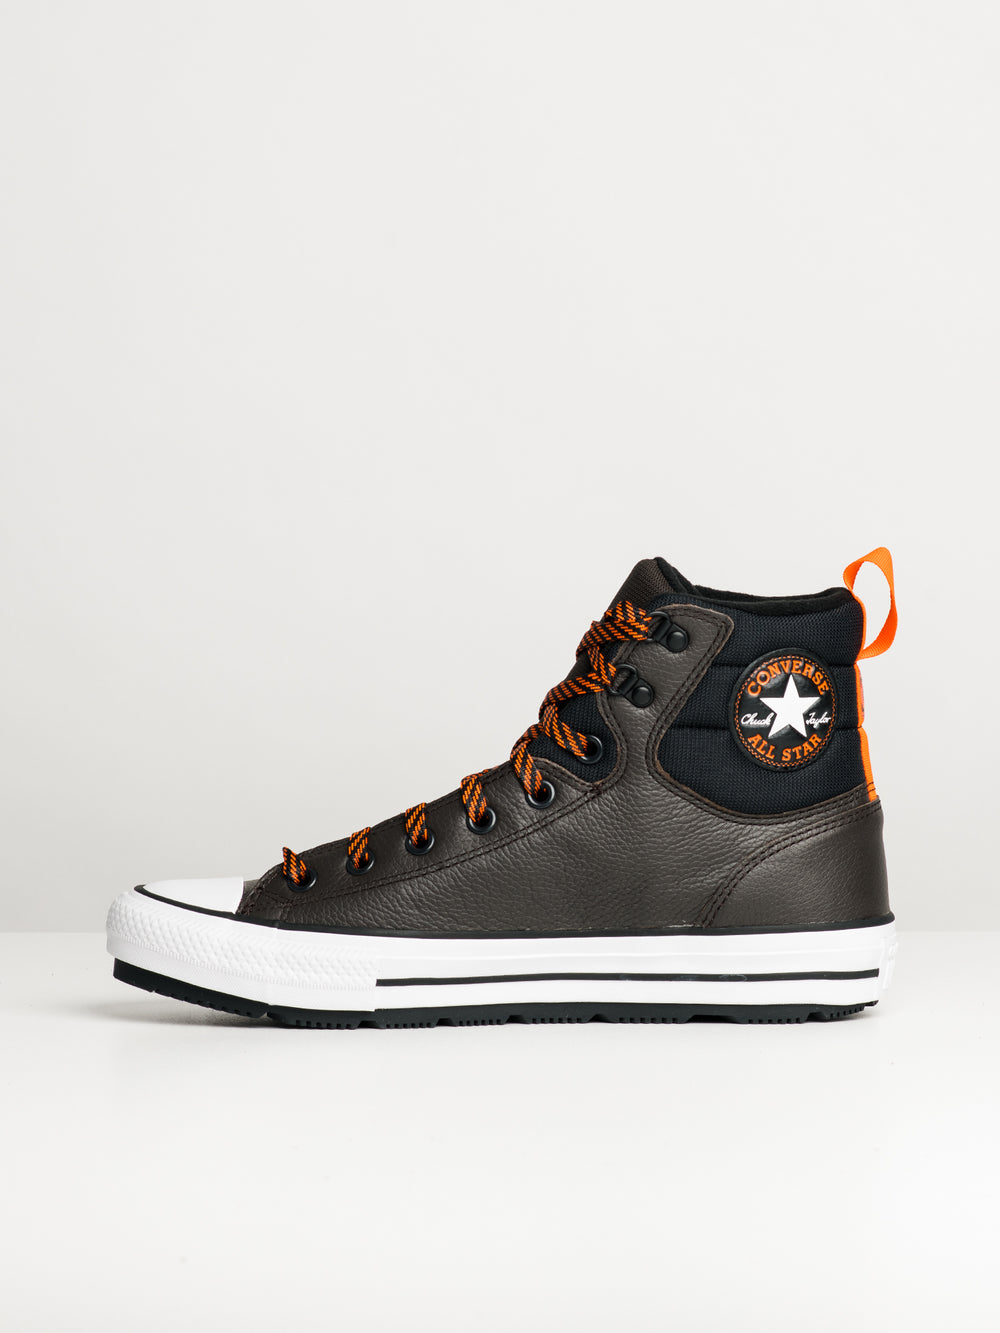 CONVERSE CHUCK TAYLOR ALL STAR BERKSHIRE BOOT POUR HOMME - DÉSTOCKAGE